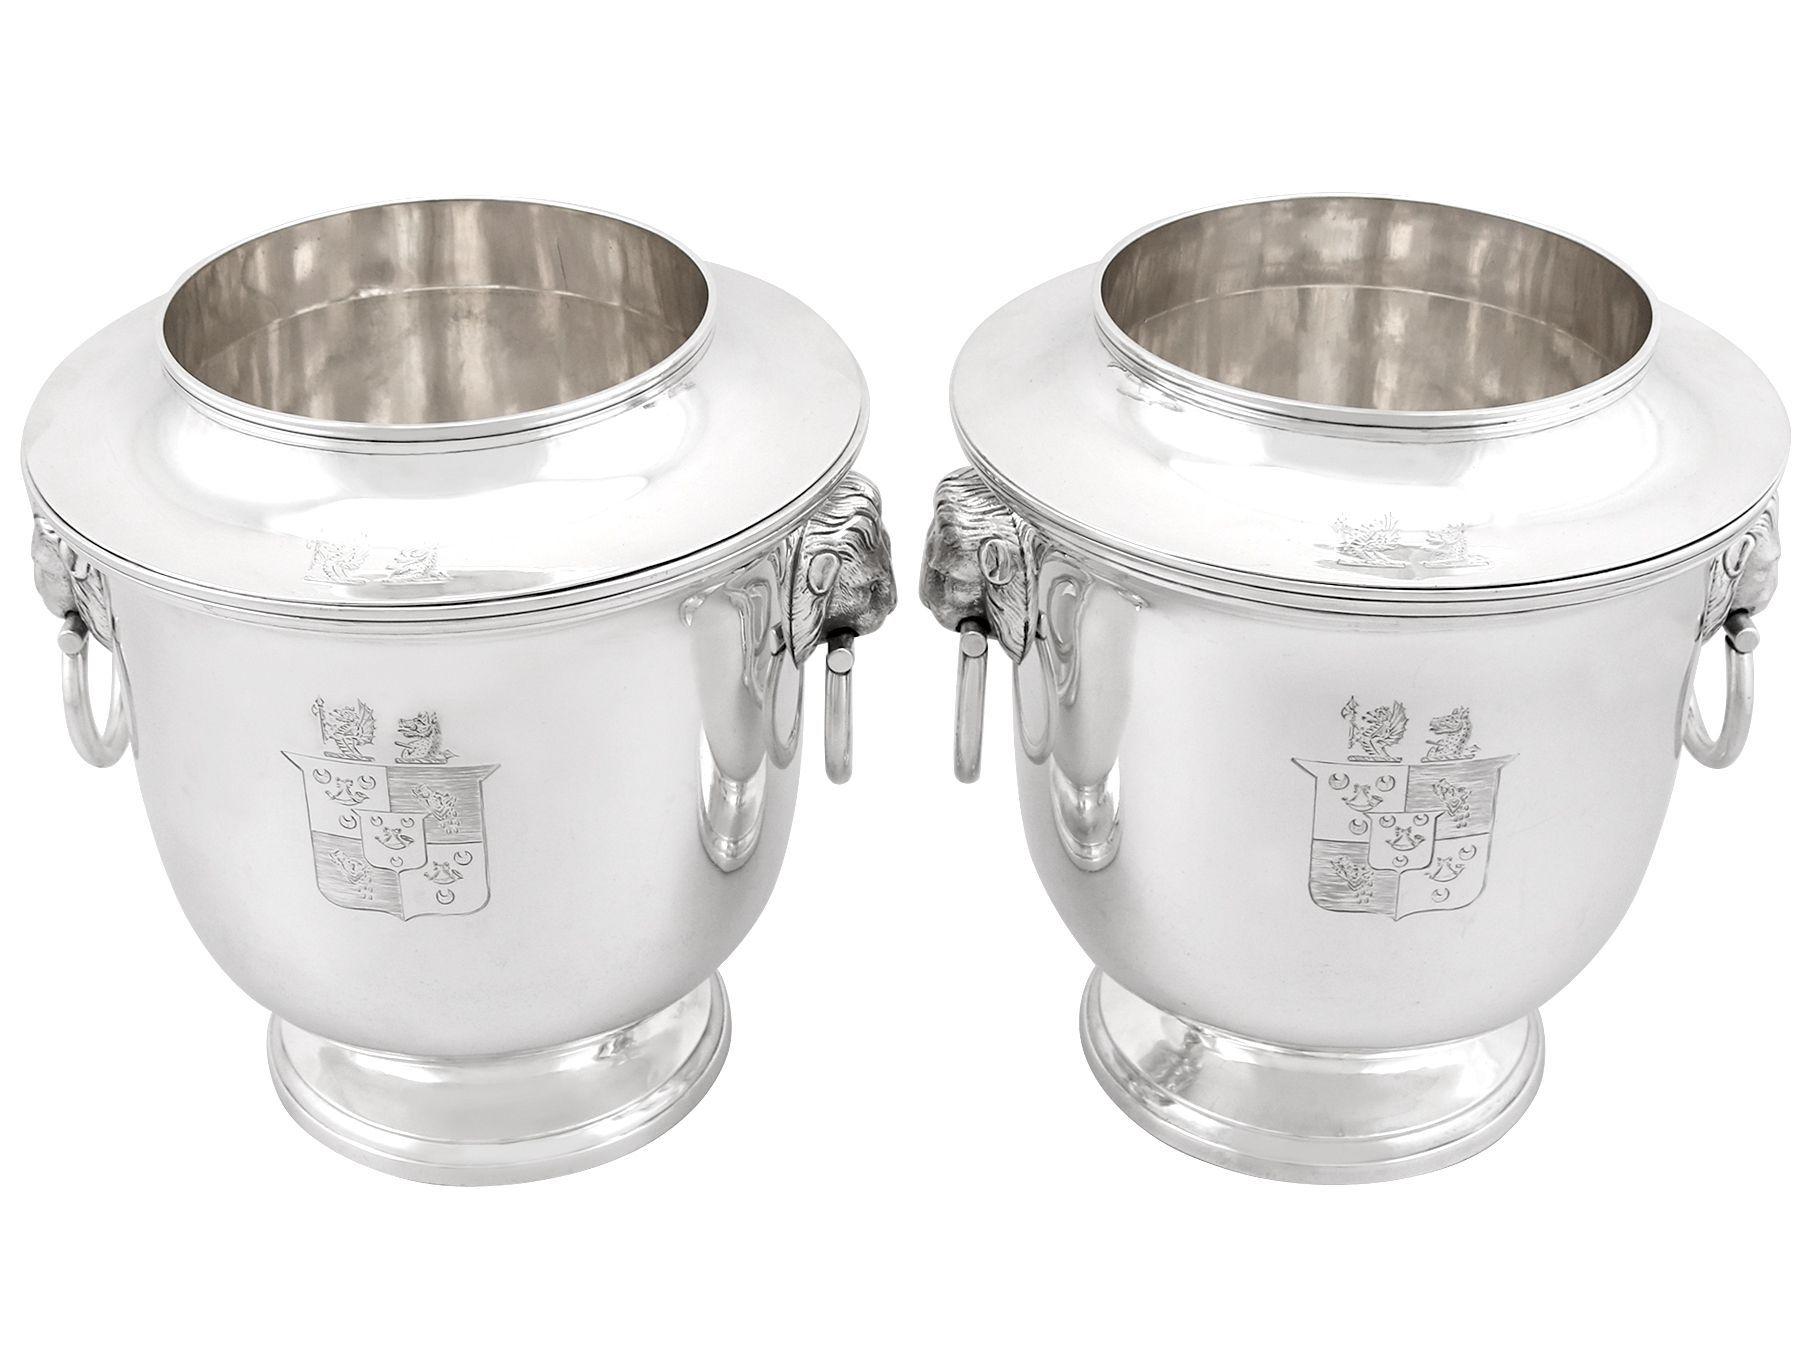 An exceptional, fine and impressive pair of antique Georgian English sterling silver wine coolers; an addition to our antique wine and drink related silverware collection.

These exceptional antique George III sterling silver wine coolers have a